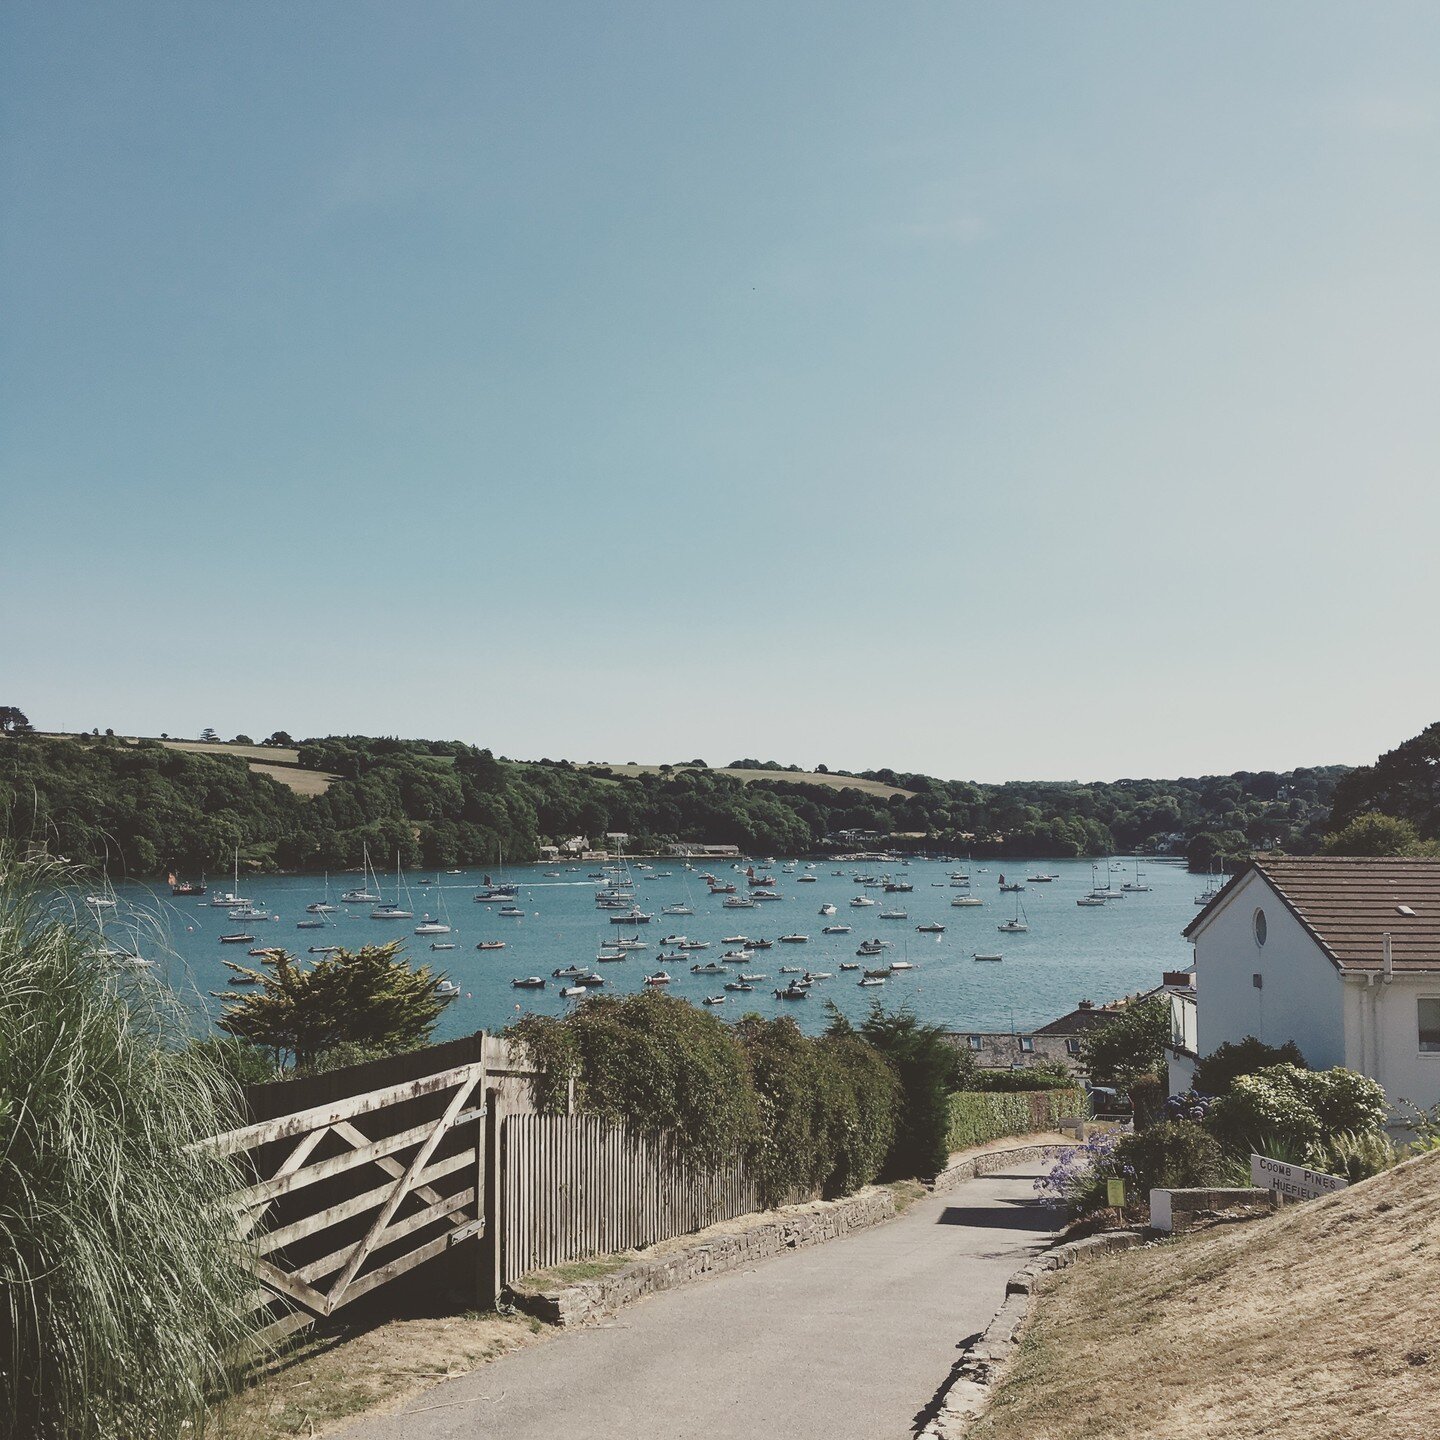 Ah, the beauty of The Helford River in summer. The quintessential 'messing about in boats' perfect spot, where would you rather be?⁠
🛶🛶🛶⁠
Just a mile down the road from @daphnecottage, Helford Passage is THE place to get on the water.  Why not hir